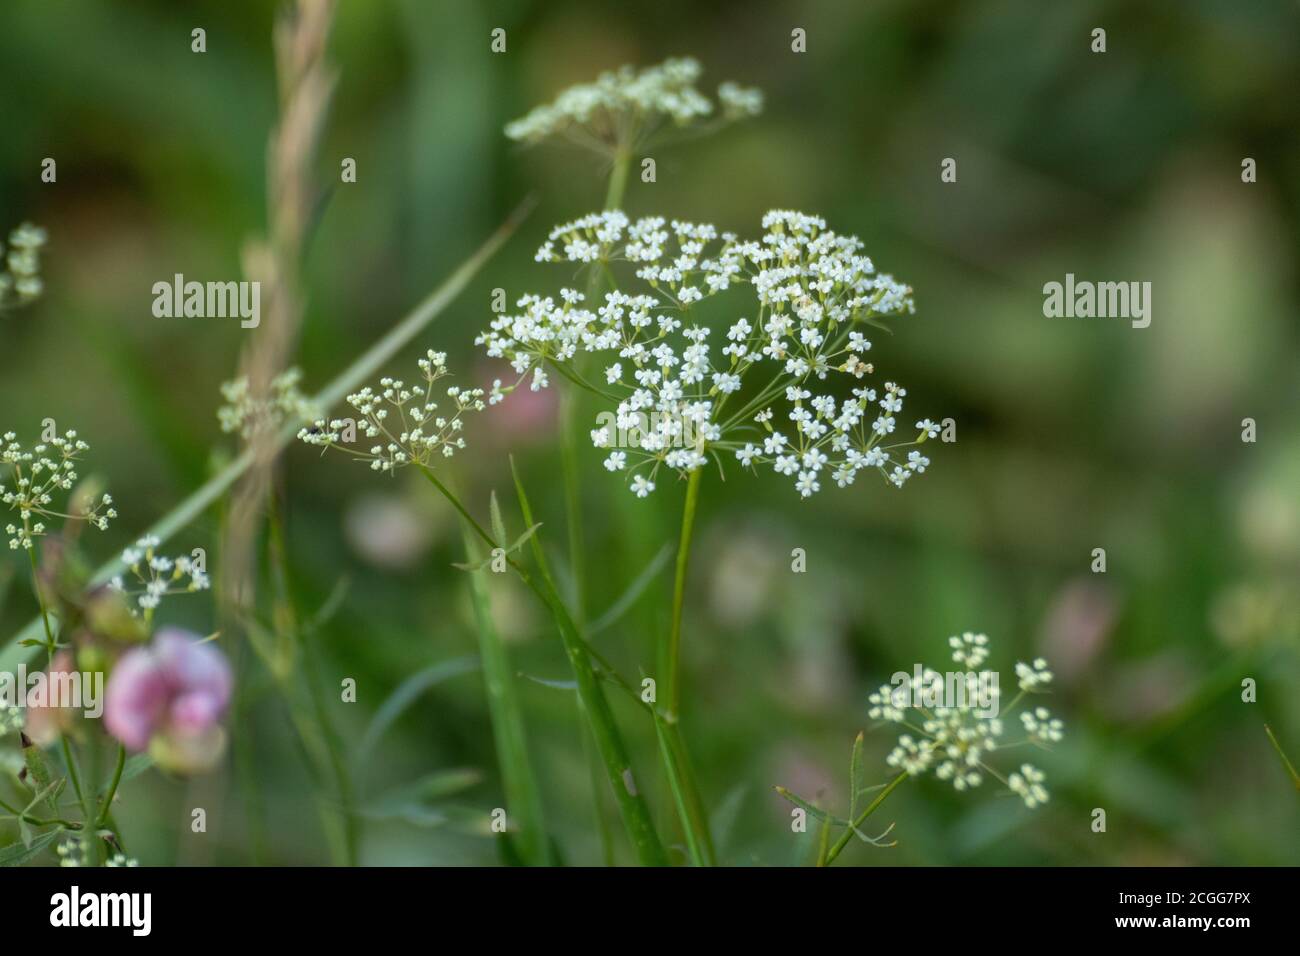 Macro of white Pimpinella Saxifraga or burnet-saxifrage flowers plant with blurred background. Natural wild lawn close-up Stock Photo